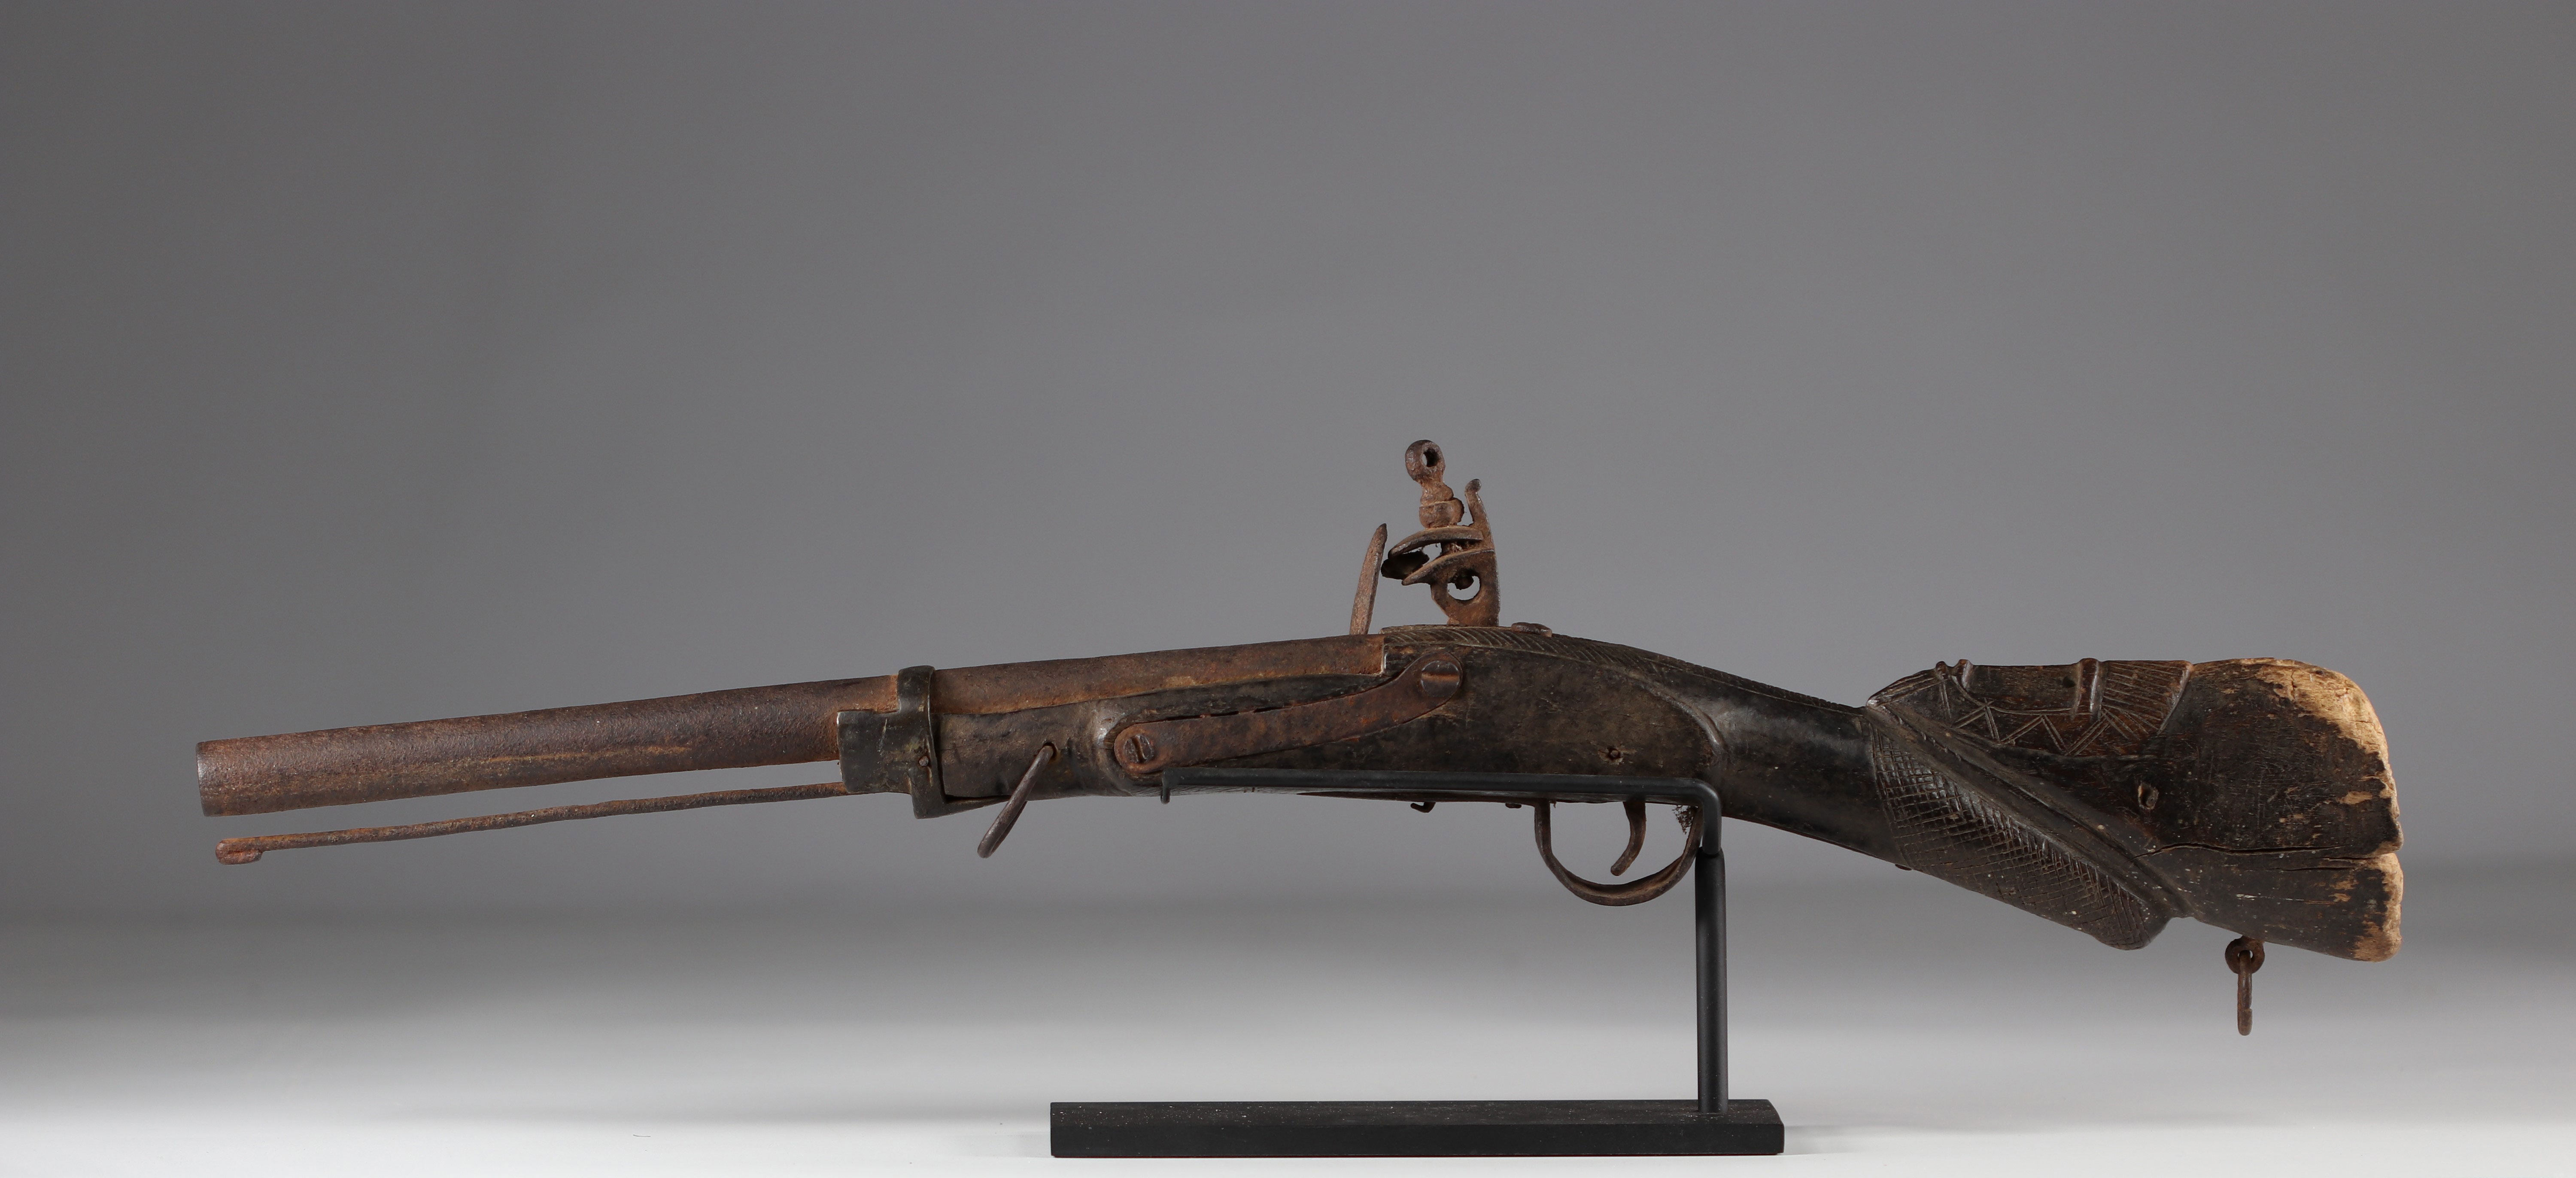 Old European flintlock rifle, decorated with a face on the butt - Bambara / Marka, Mali. 19th centur - Image 2 of 3